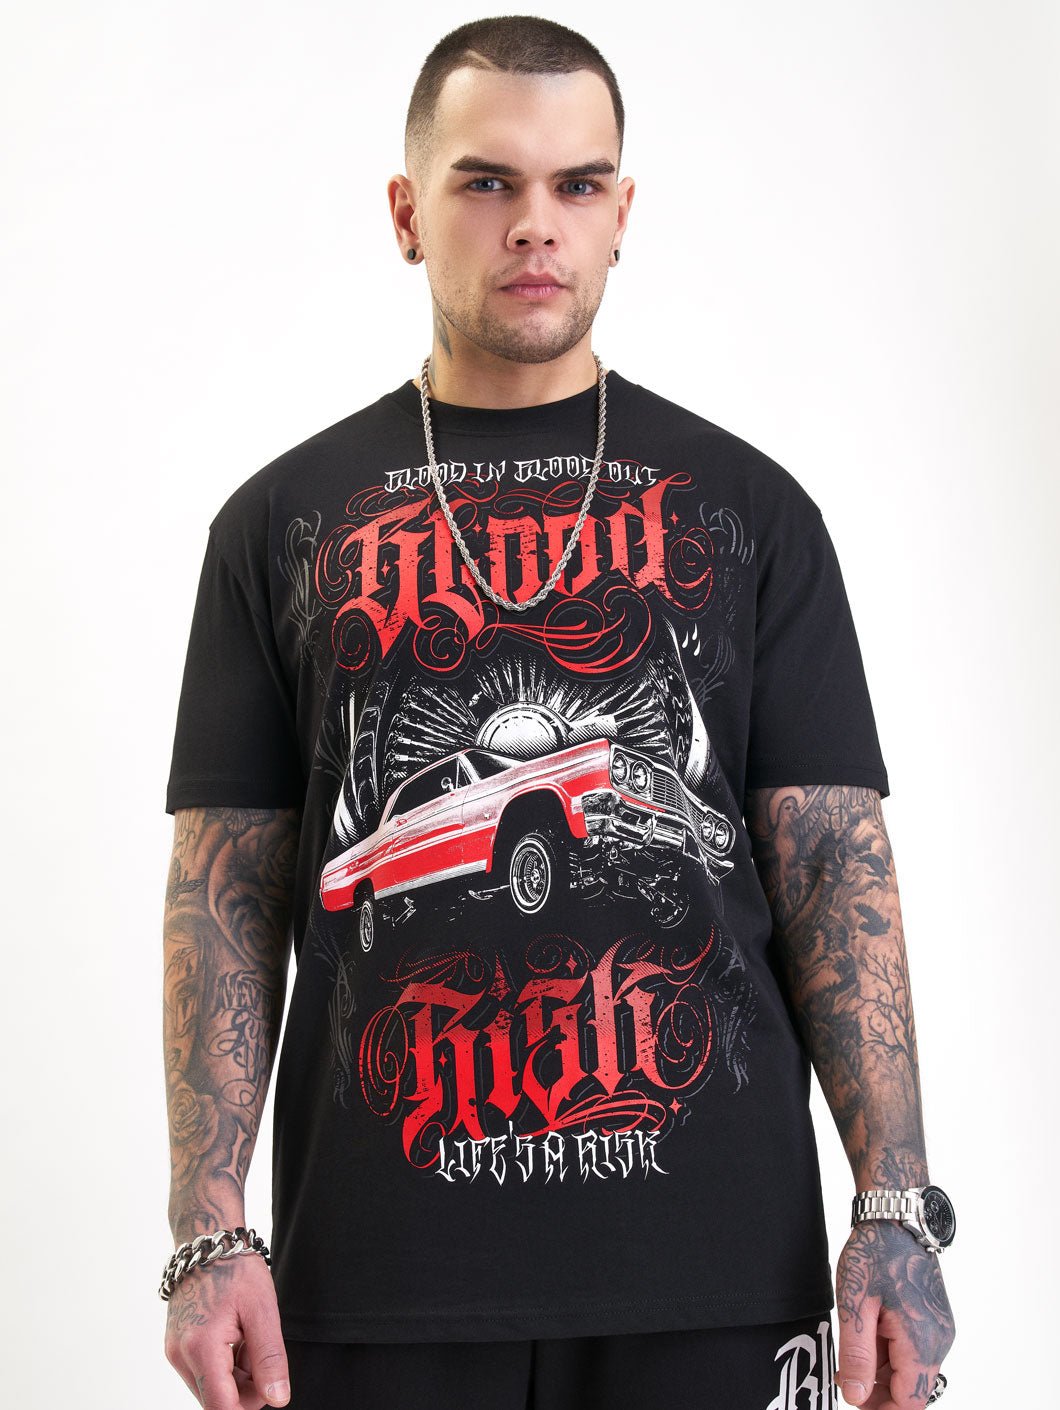 Blood In Blood Out Tavos T-Shirt - 7